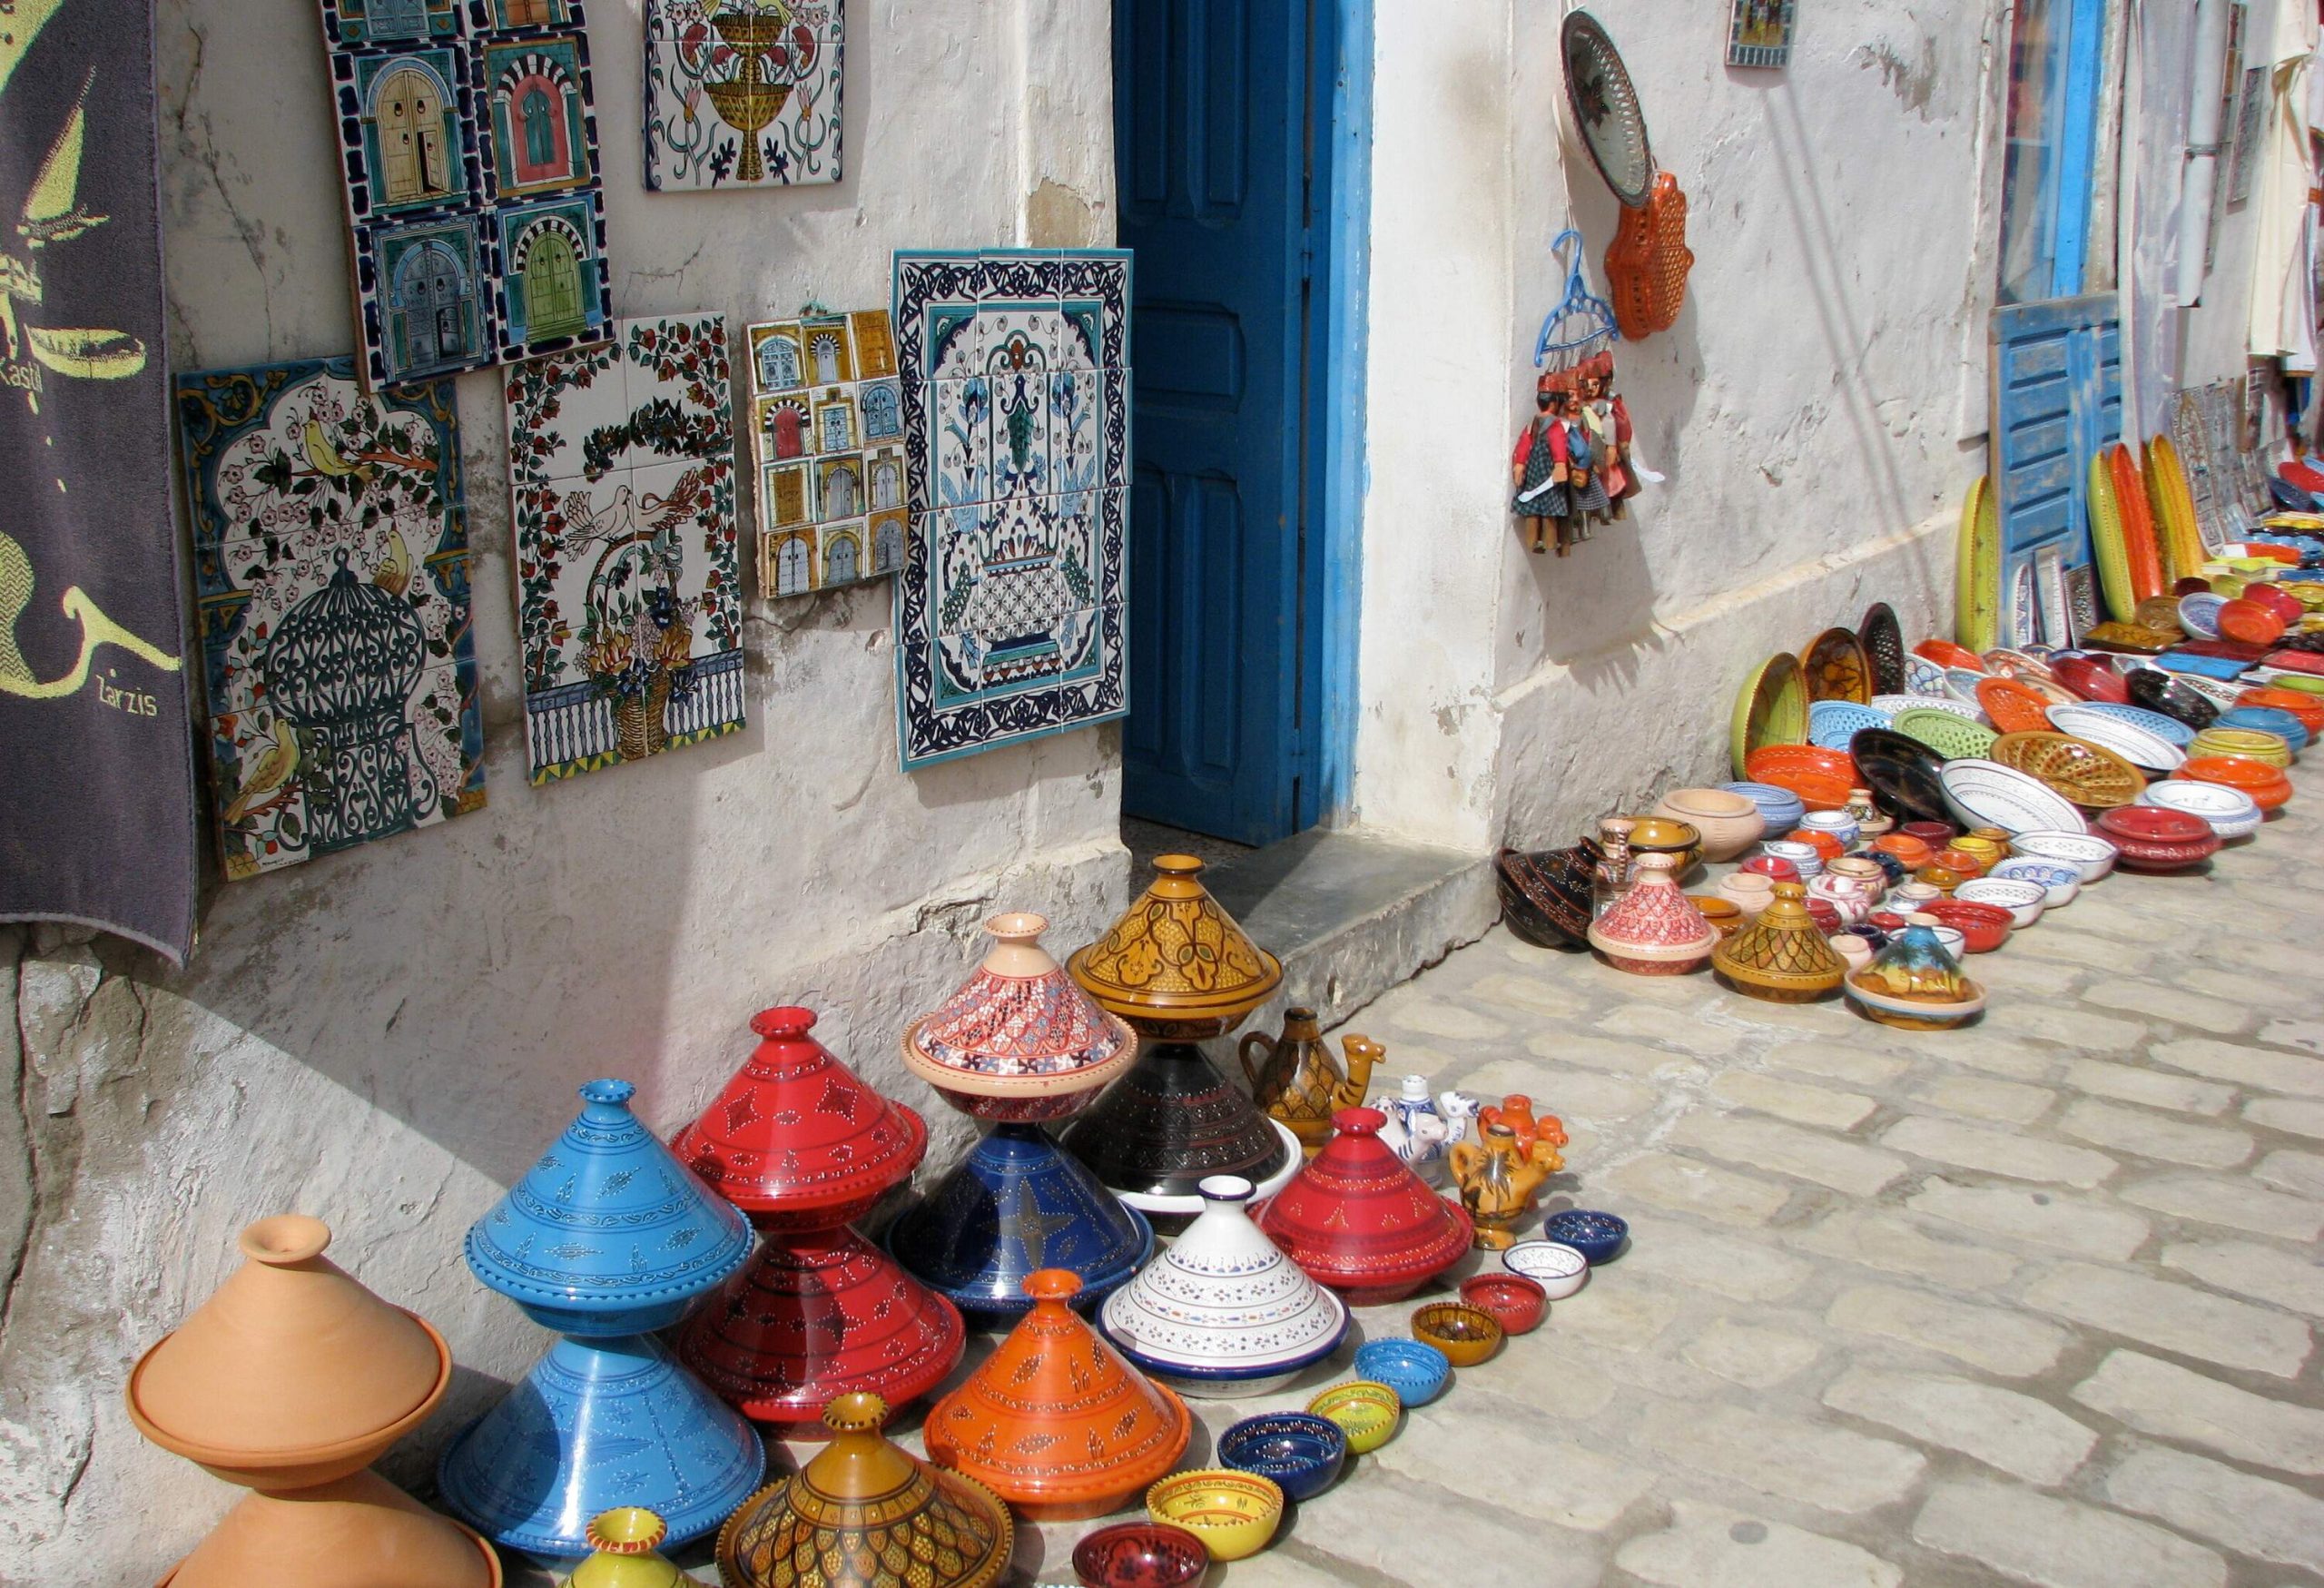 A display of colourful pottery, bowls, and hanged carpets outside a white residence with a blue door.